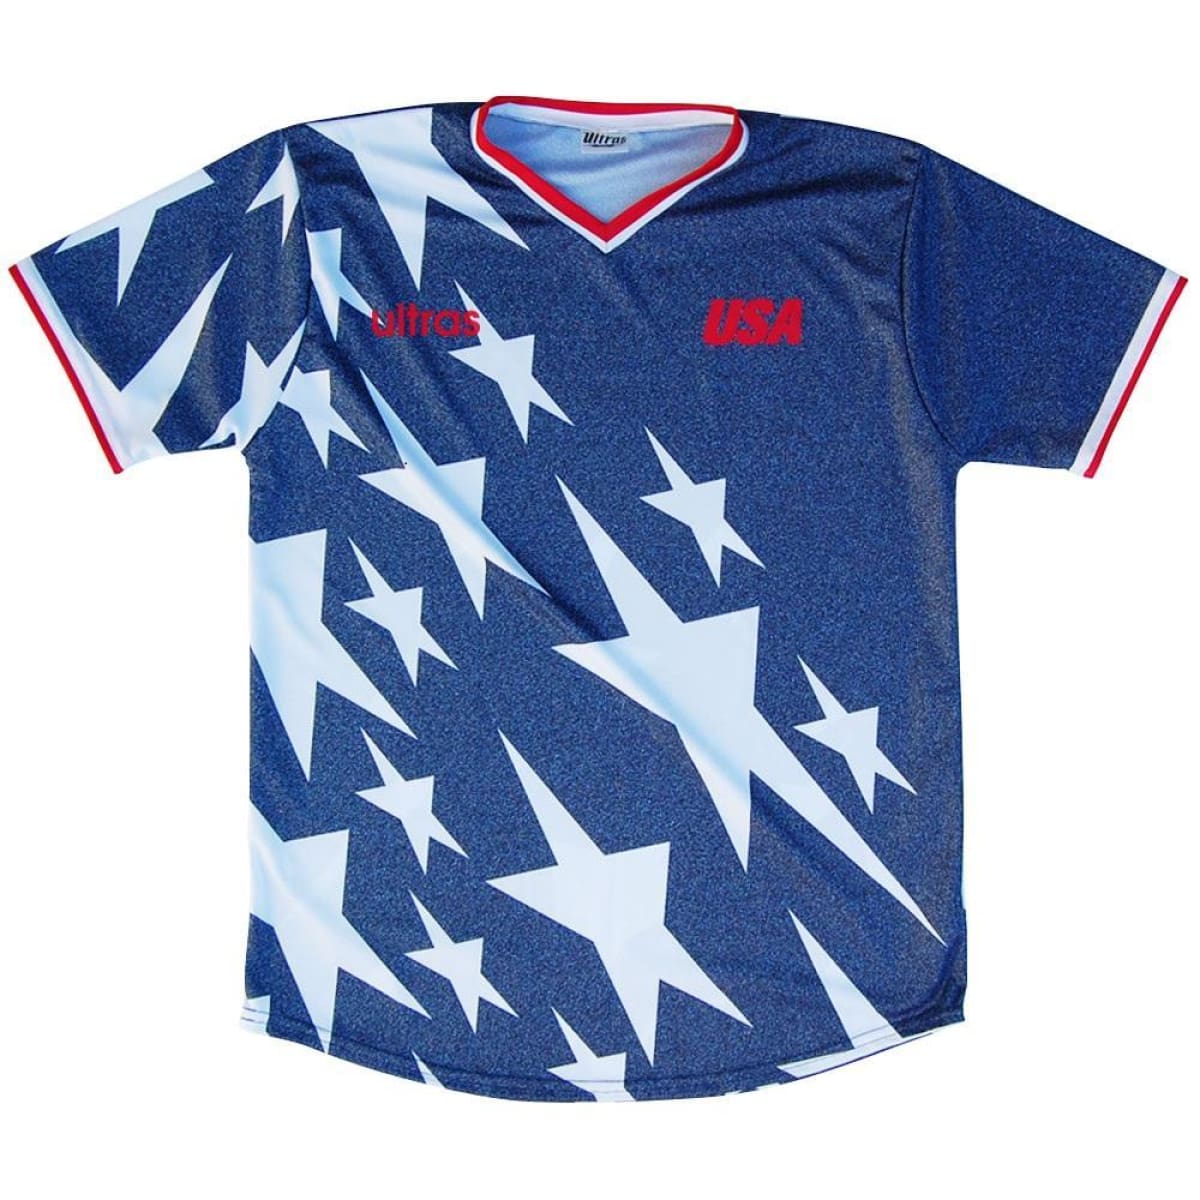 Image of Ultras USA Denim Soccer Jersey Made In USA